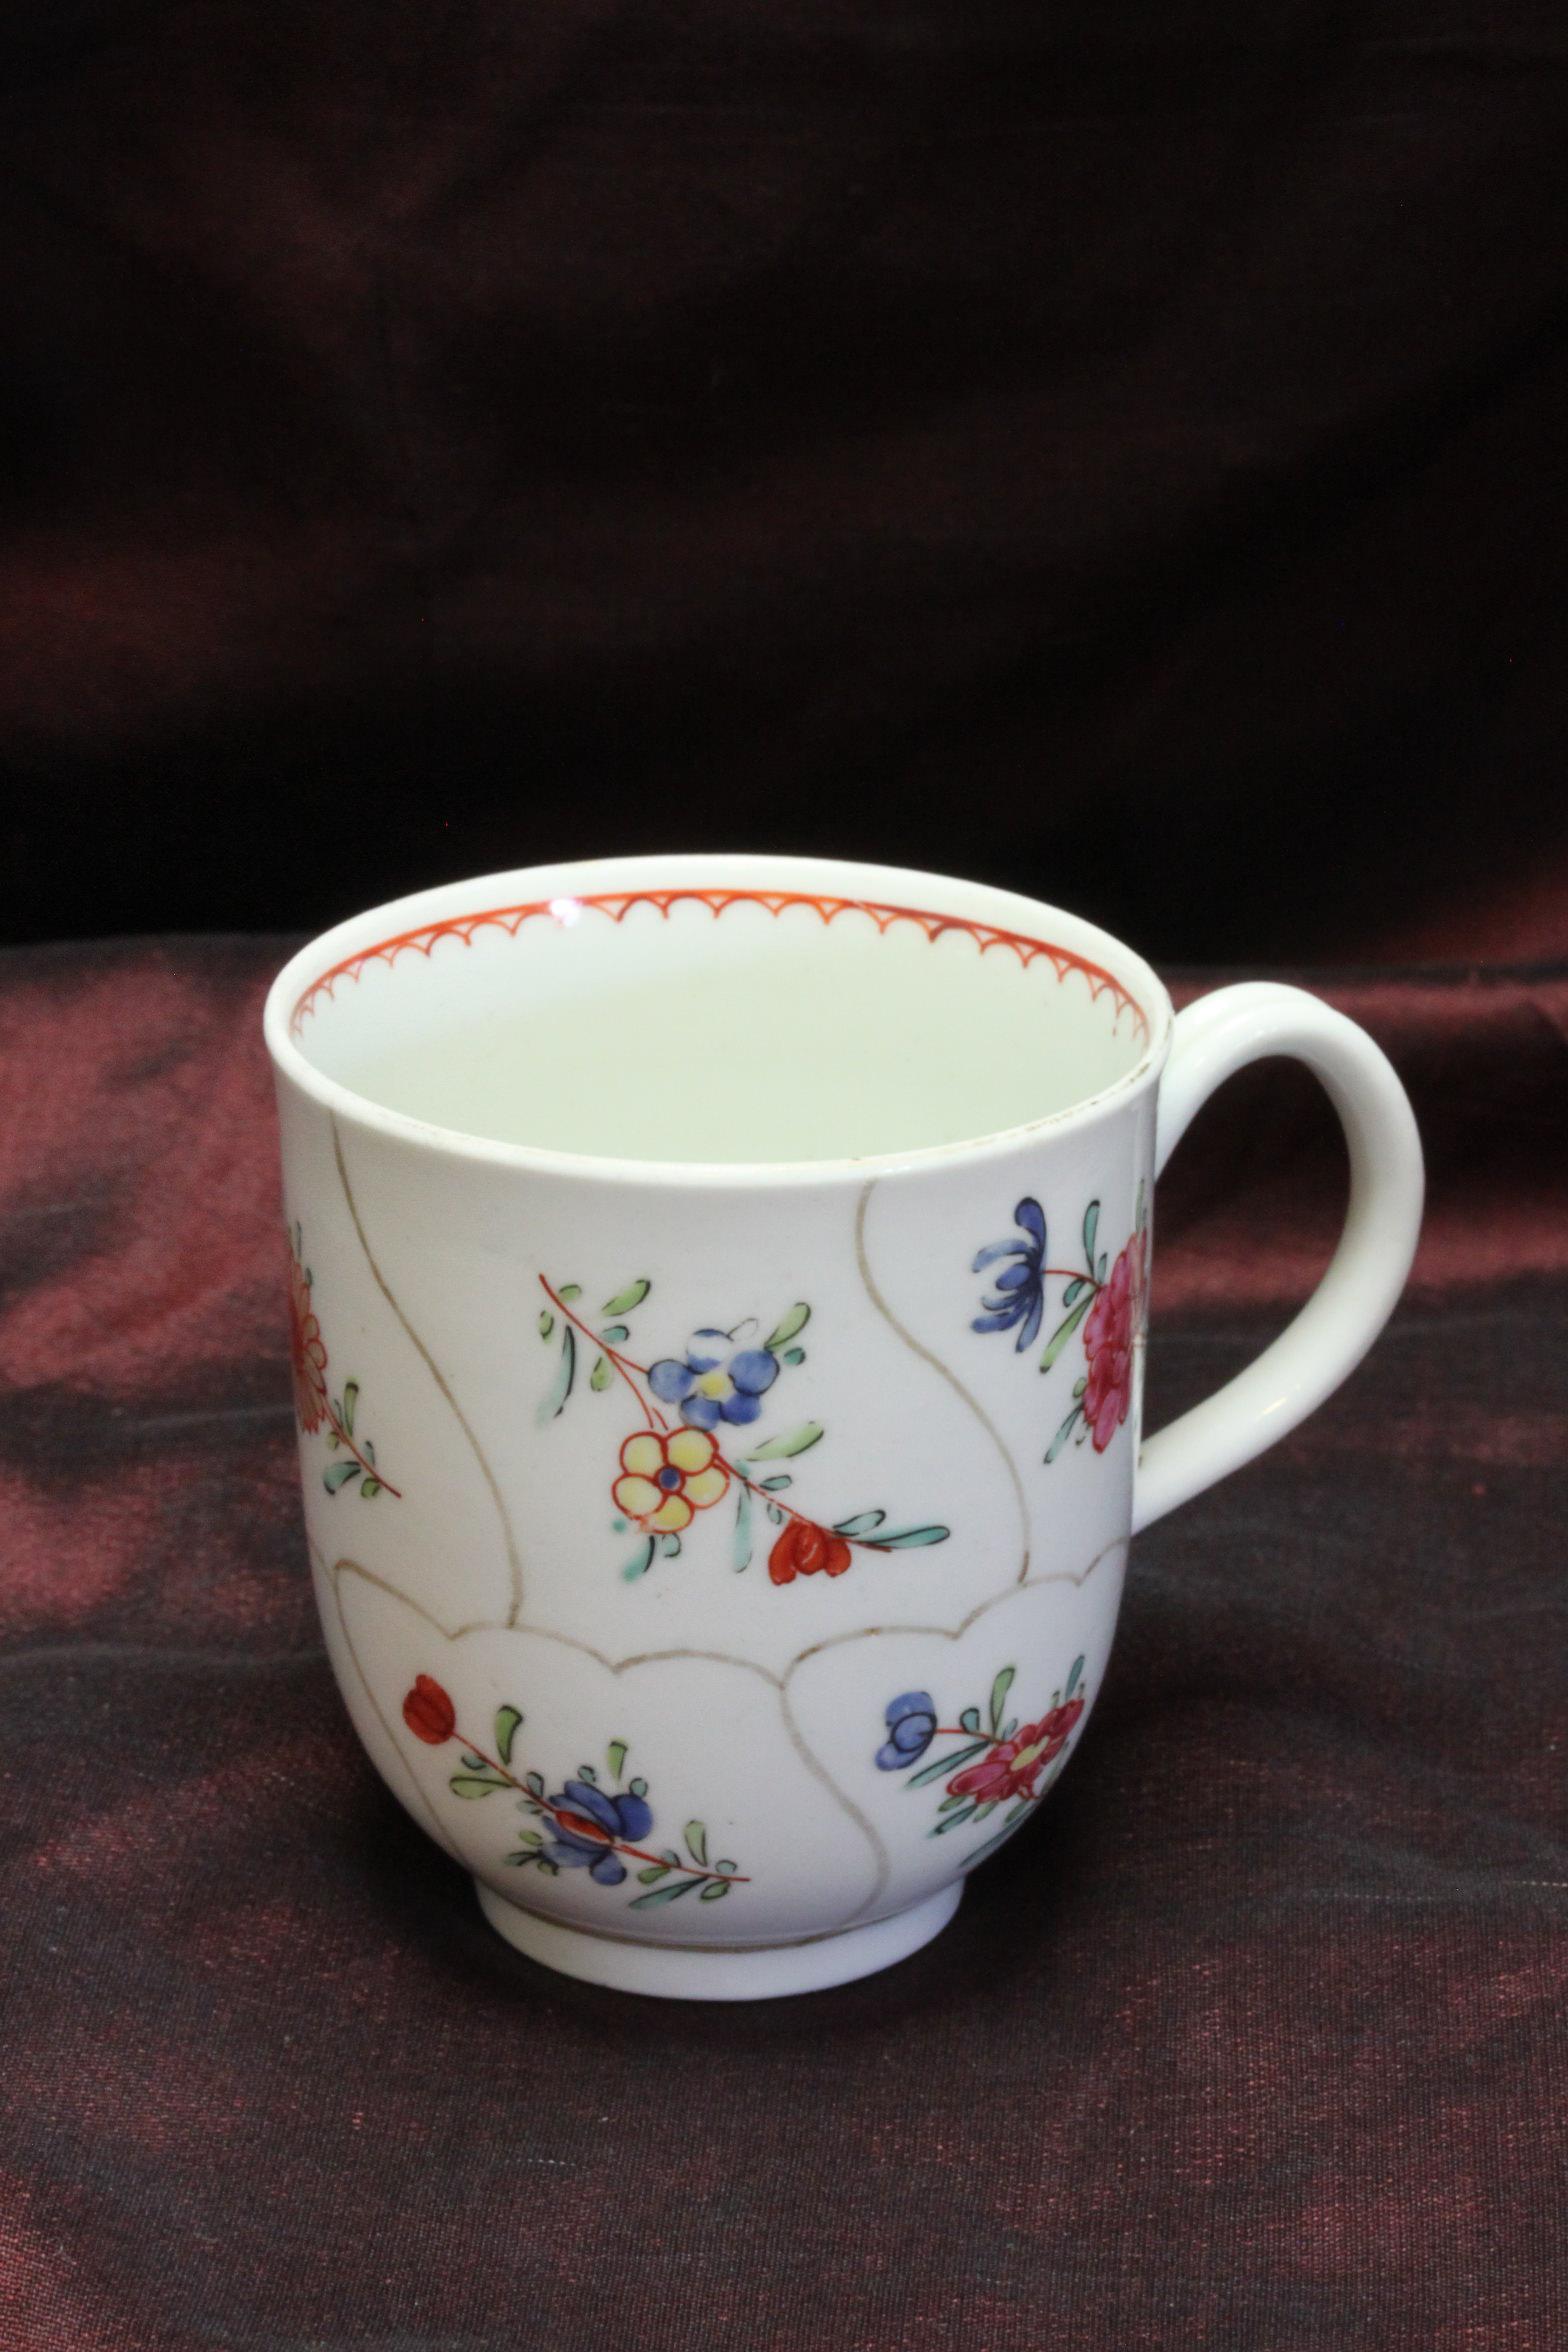 This Worcester porcelain coffee cup was originally decorated with what is known as the 'Gold Queen's Pattern